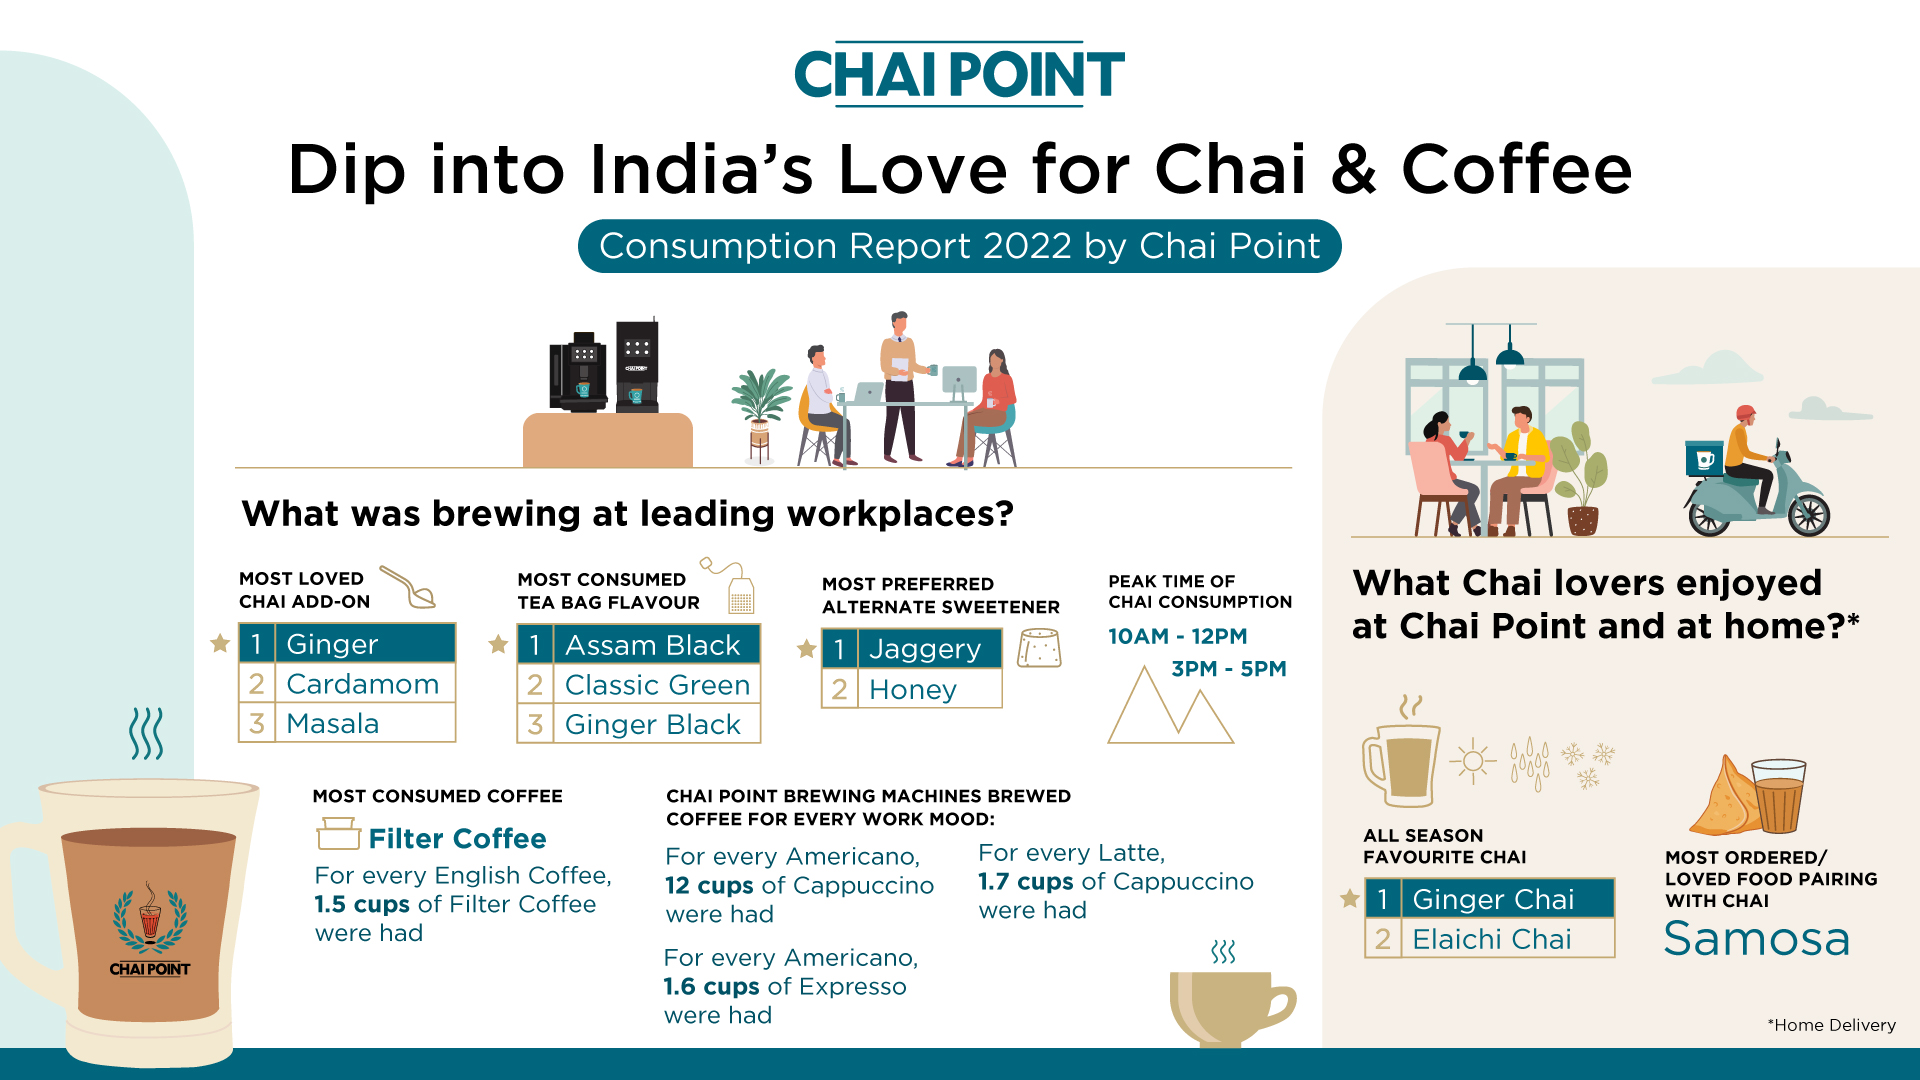 Chai Point’s consumption reveals Ginger Tea is the most preferred beverage by Indians